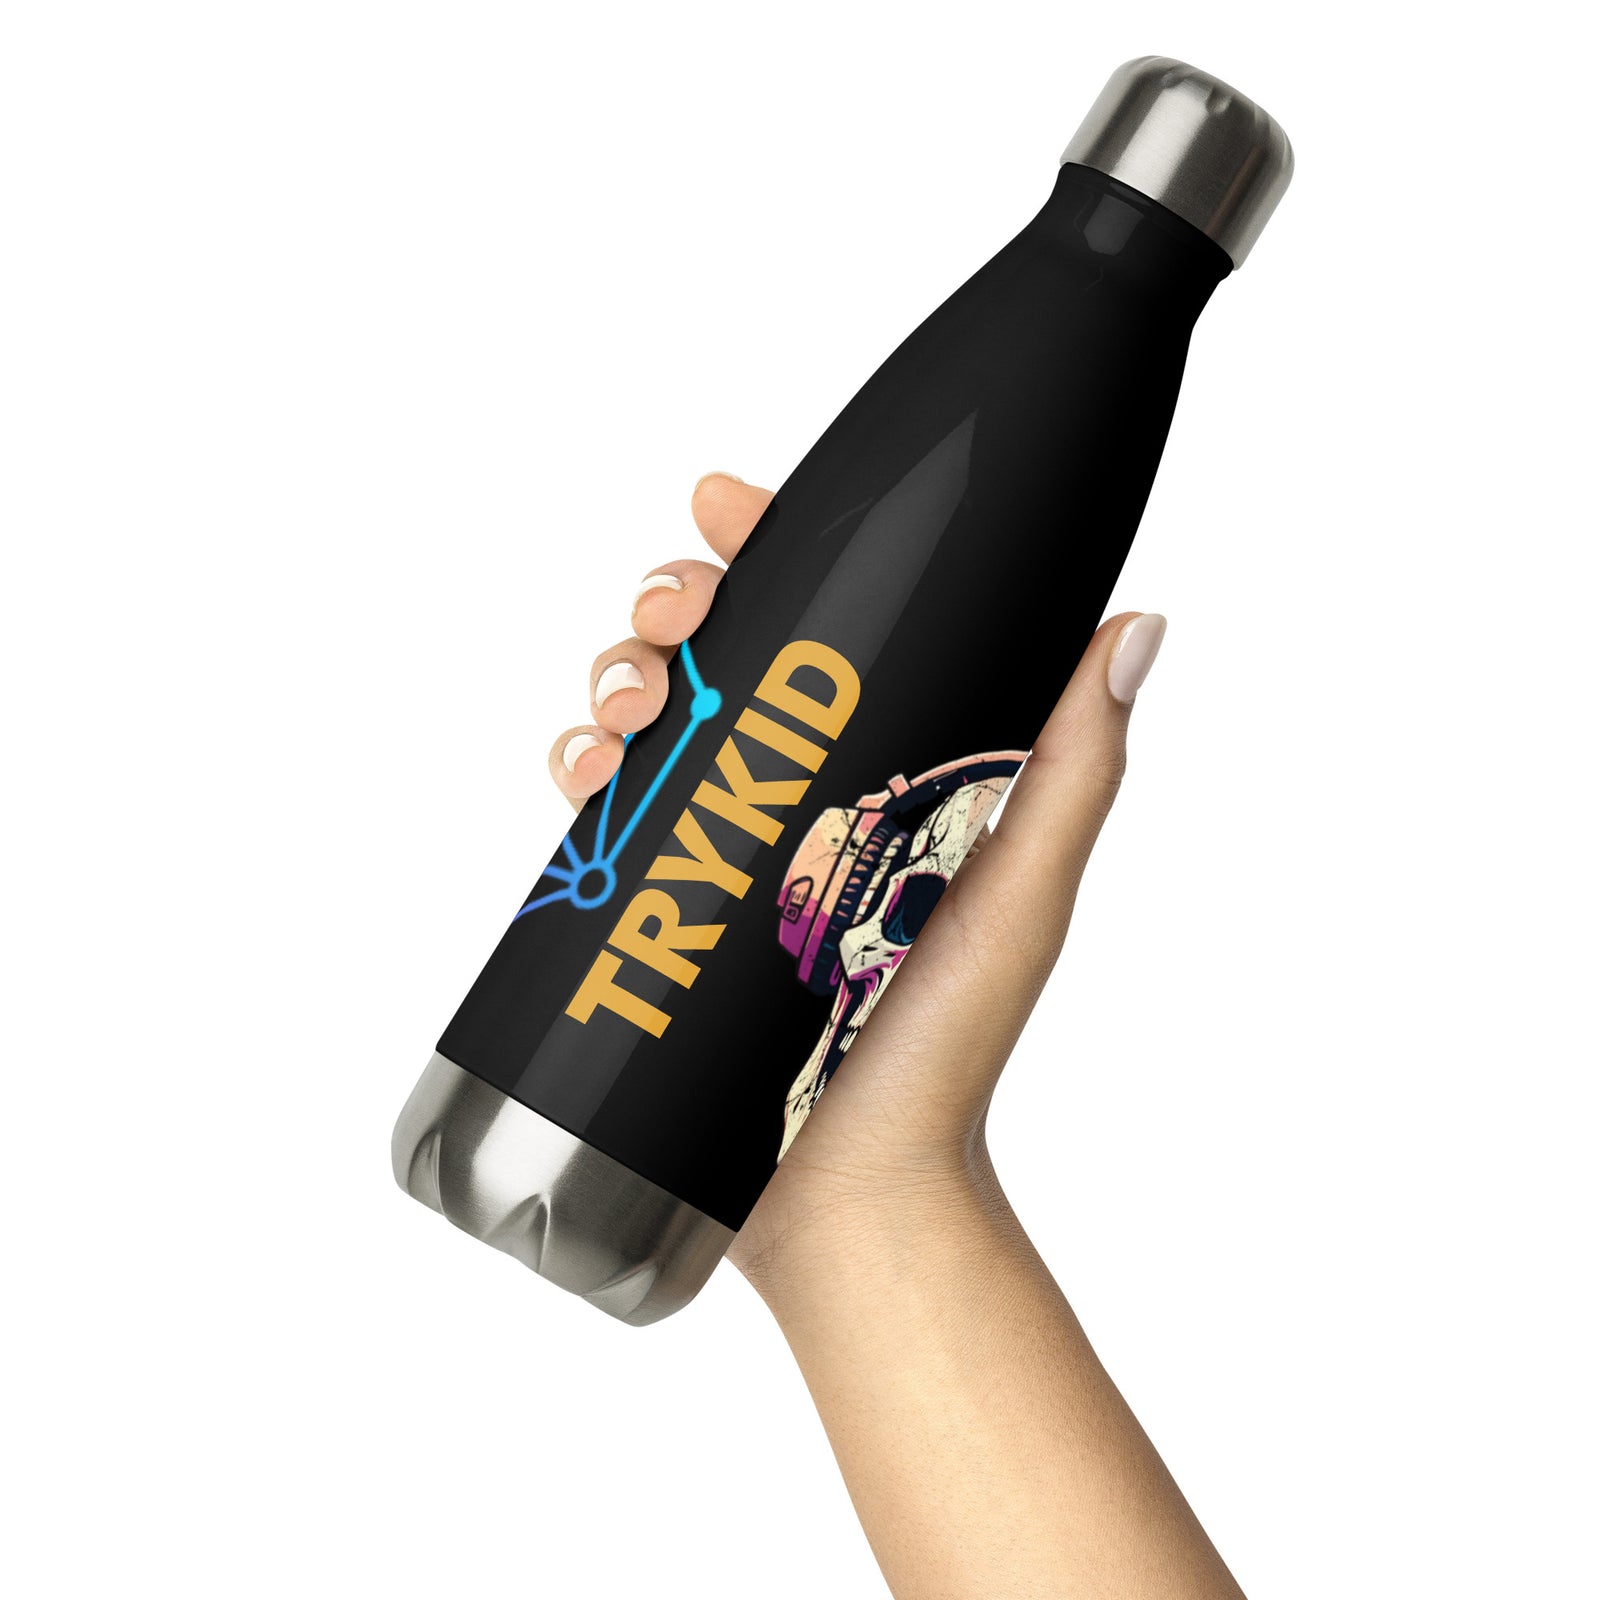 Stainless steel water bottle with skull and chemistry puzzle and TRYKID log trending and stylish